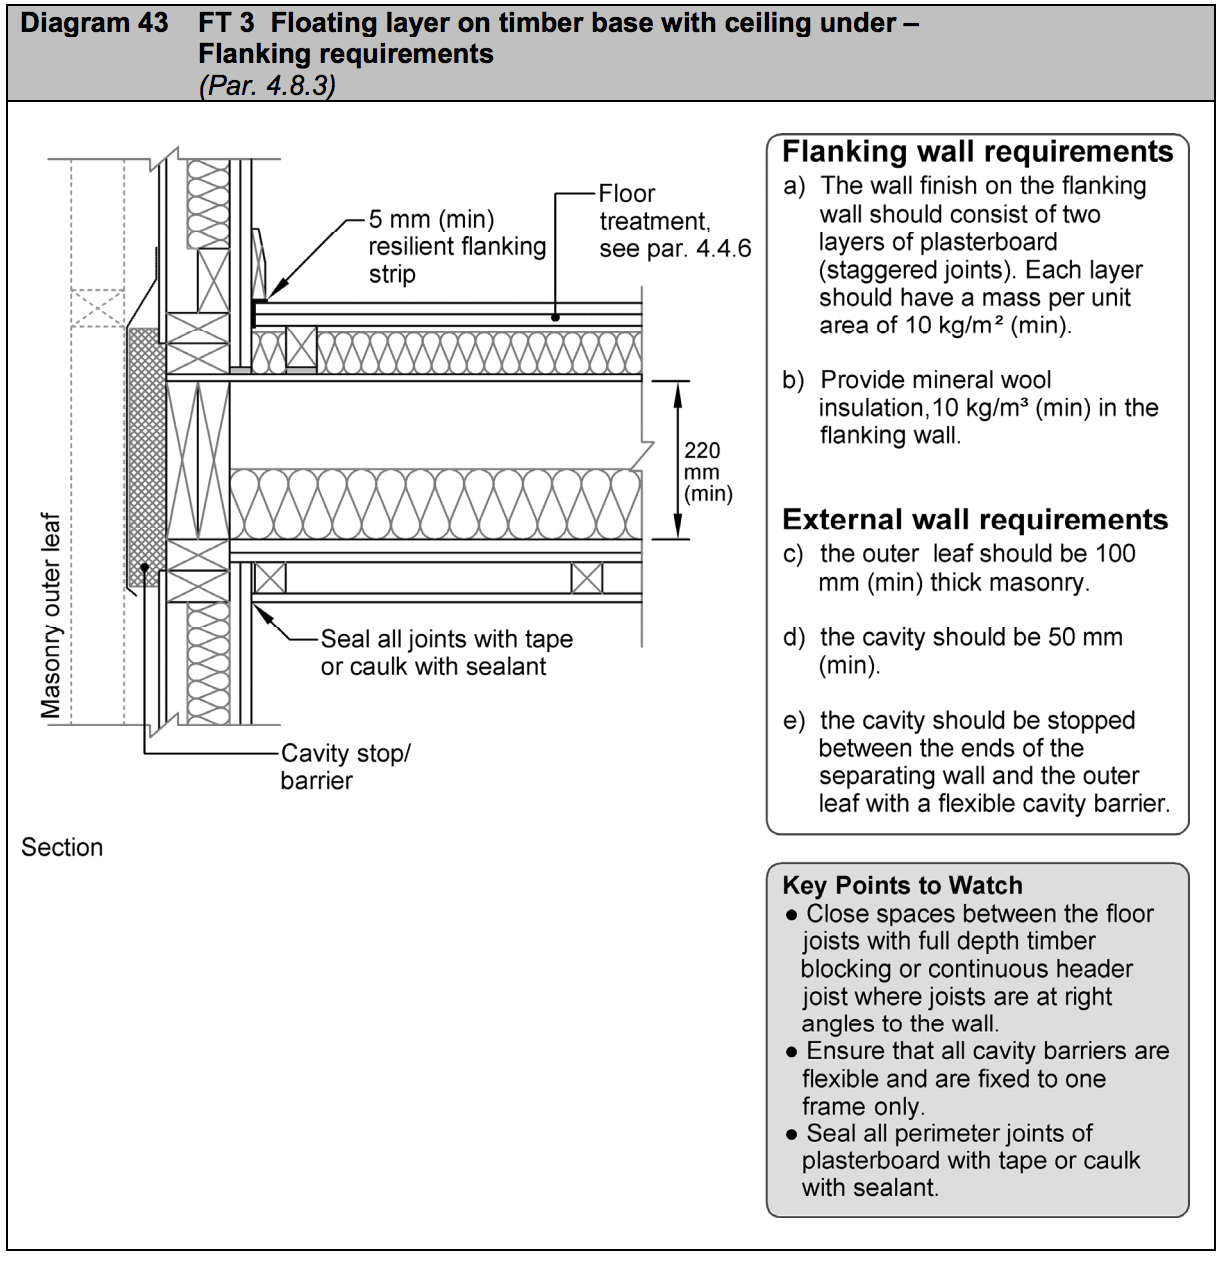 Diagram HE43 - FT 3 Floating layer on timber base with ceiling under - flanking requirements - Extract from TGD E